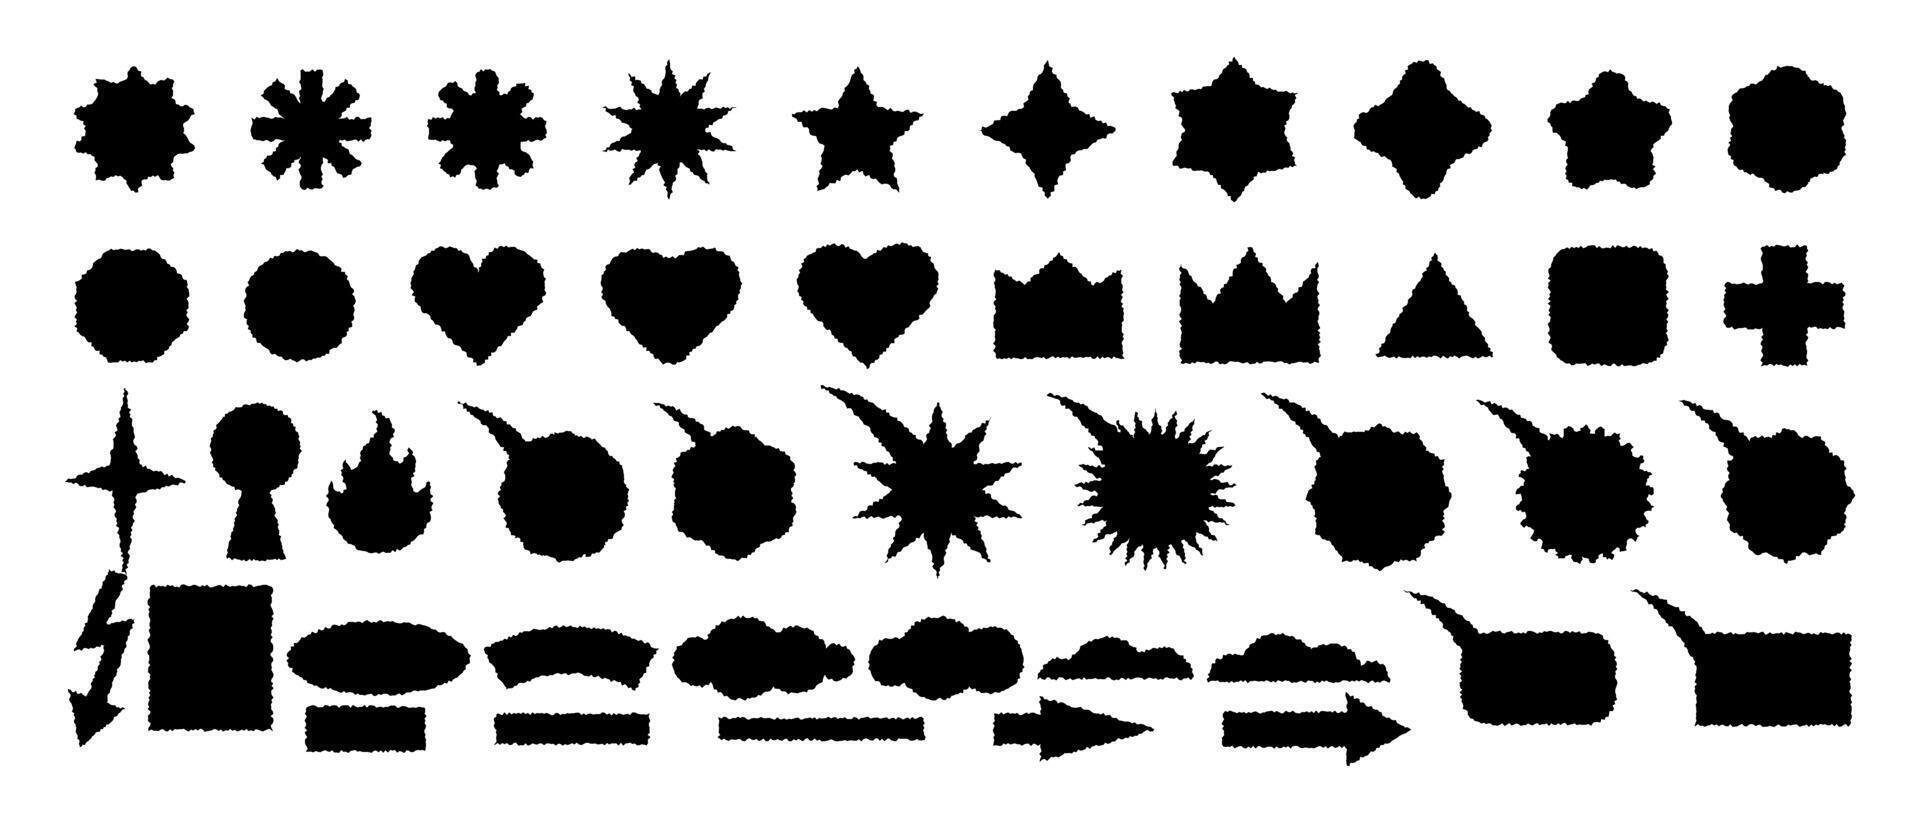 Basic shapes with a rough, ragged edge. Set of grunge elements for collage, sticker. Black icons. Heart crown arrow star circle bubble speech flame lightning square rectangle. Vector illustration.